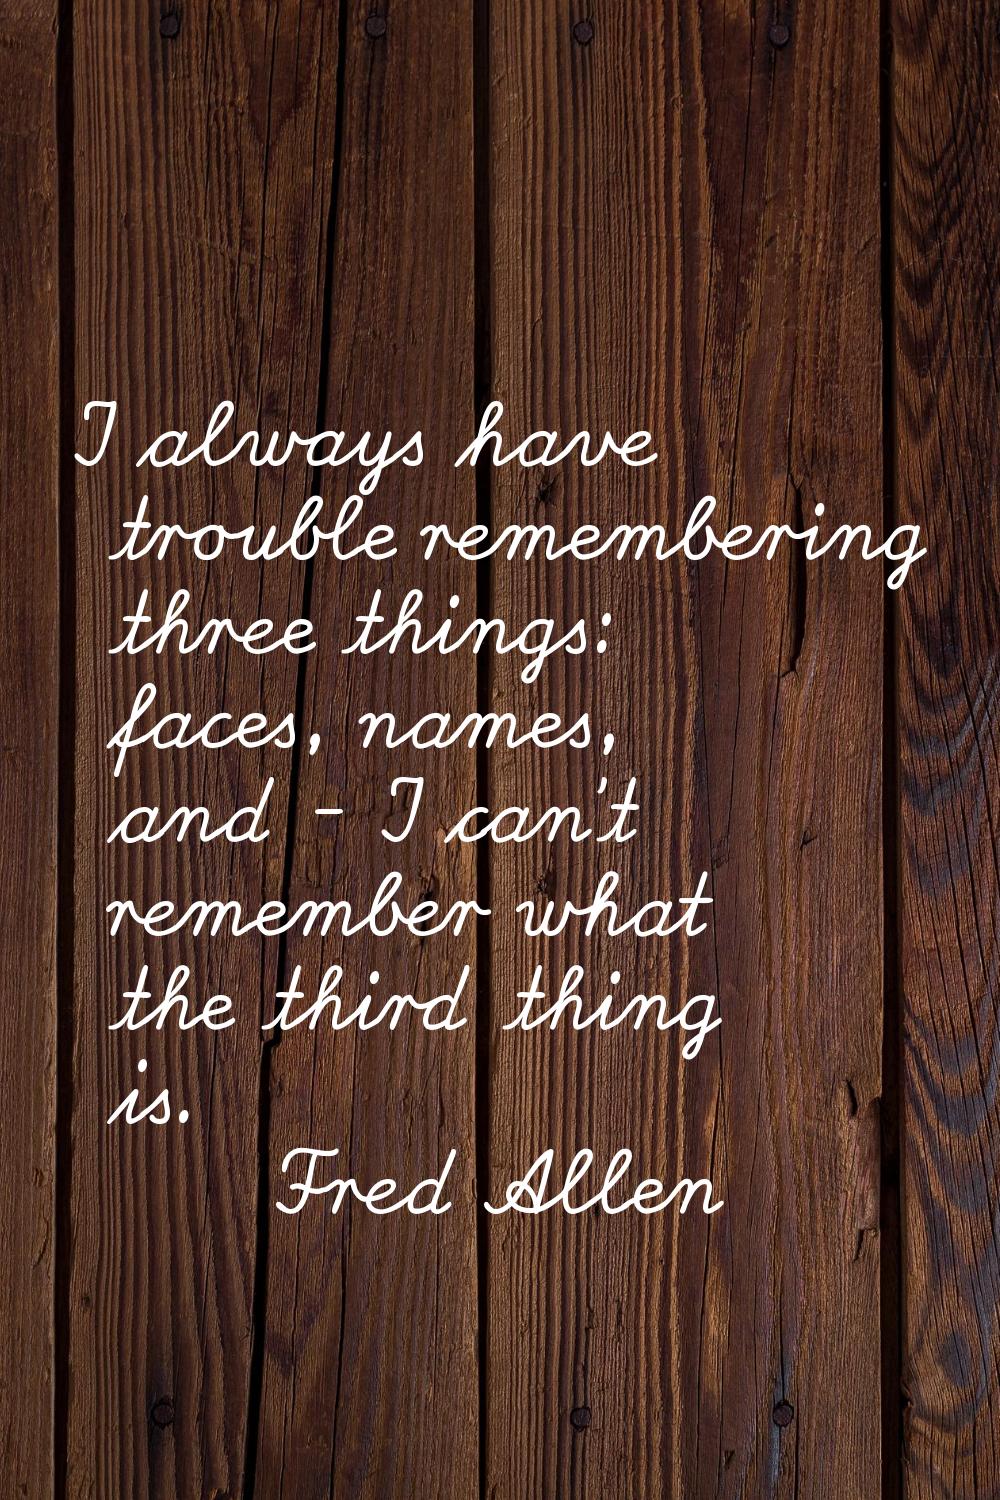 I always have trouble remembering three things: faces, names, and - I can't remember what the third